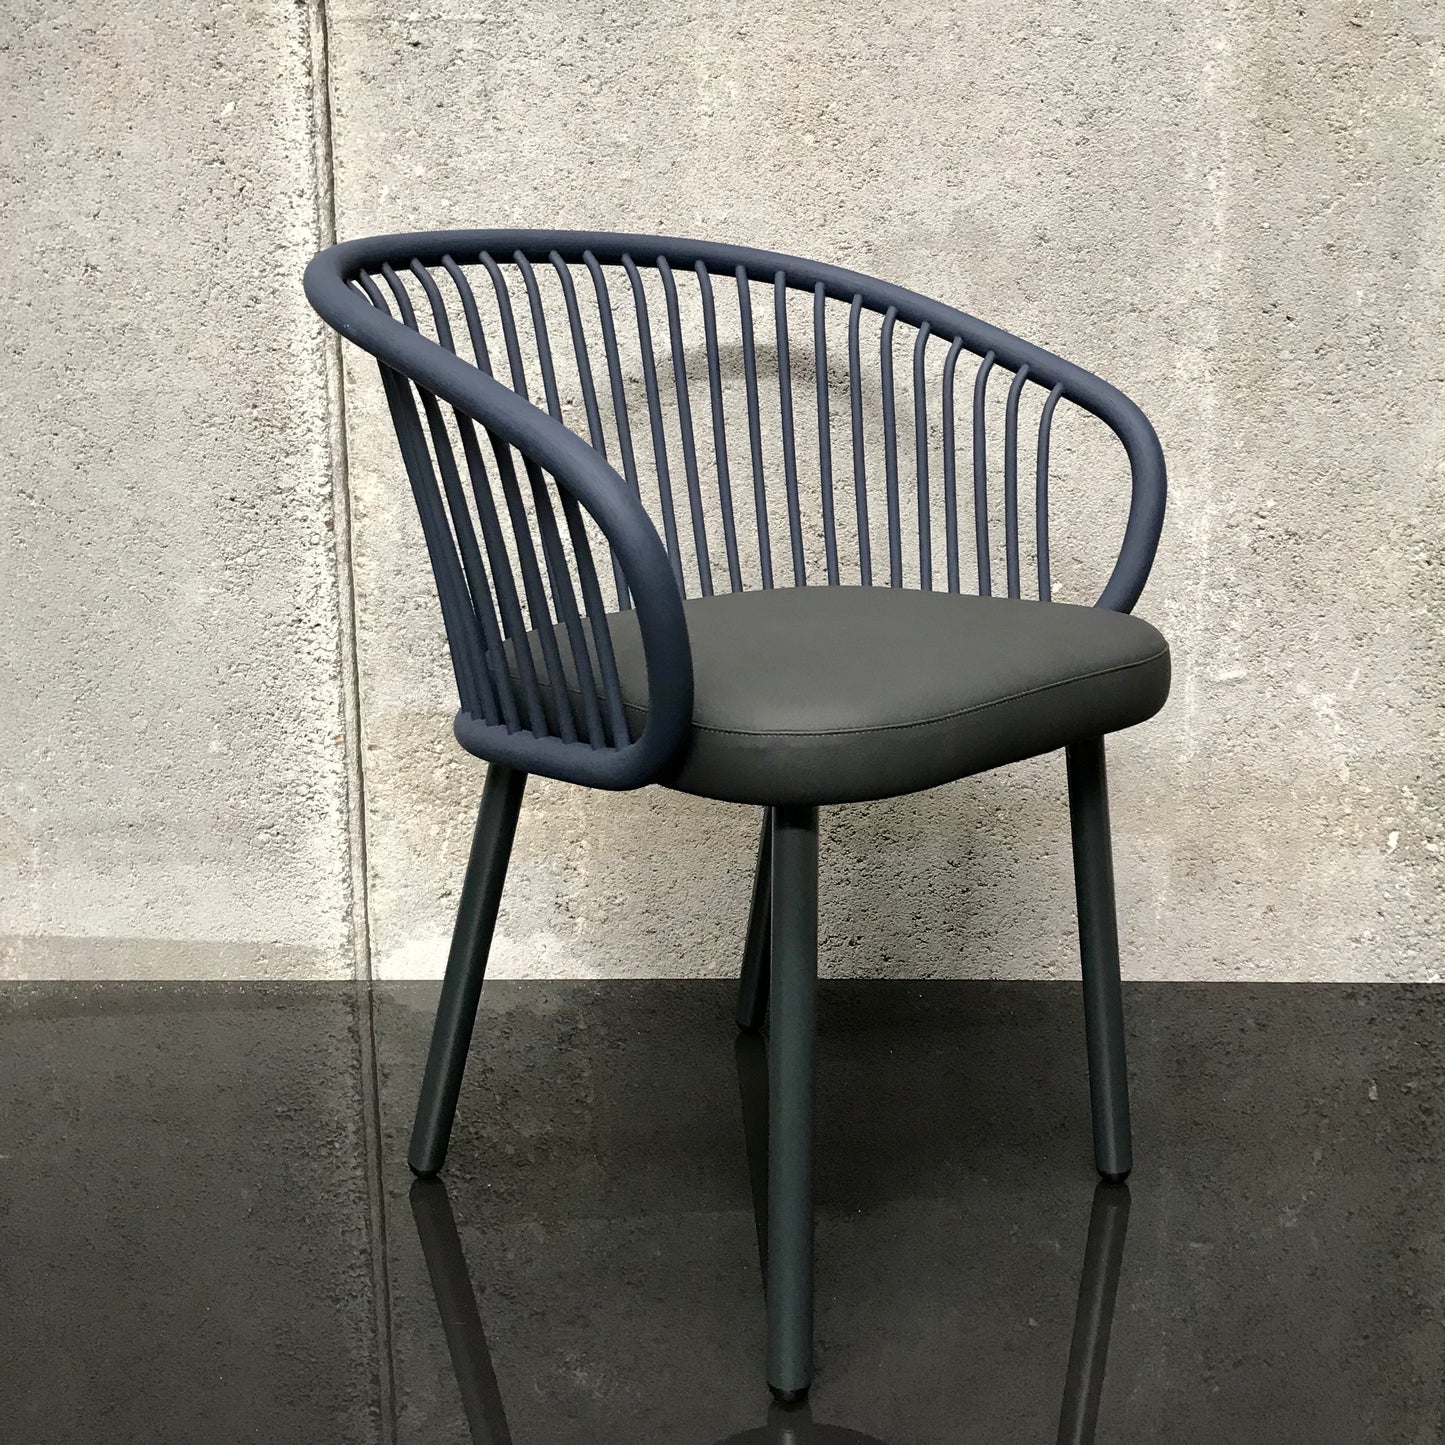 PAIR of Huma Dining Chair by Expormim (2 Pairs available)